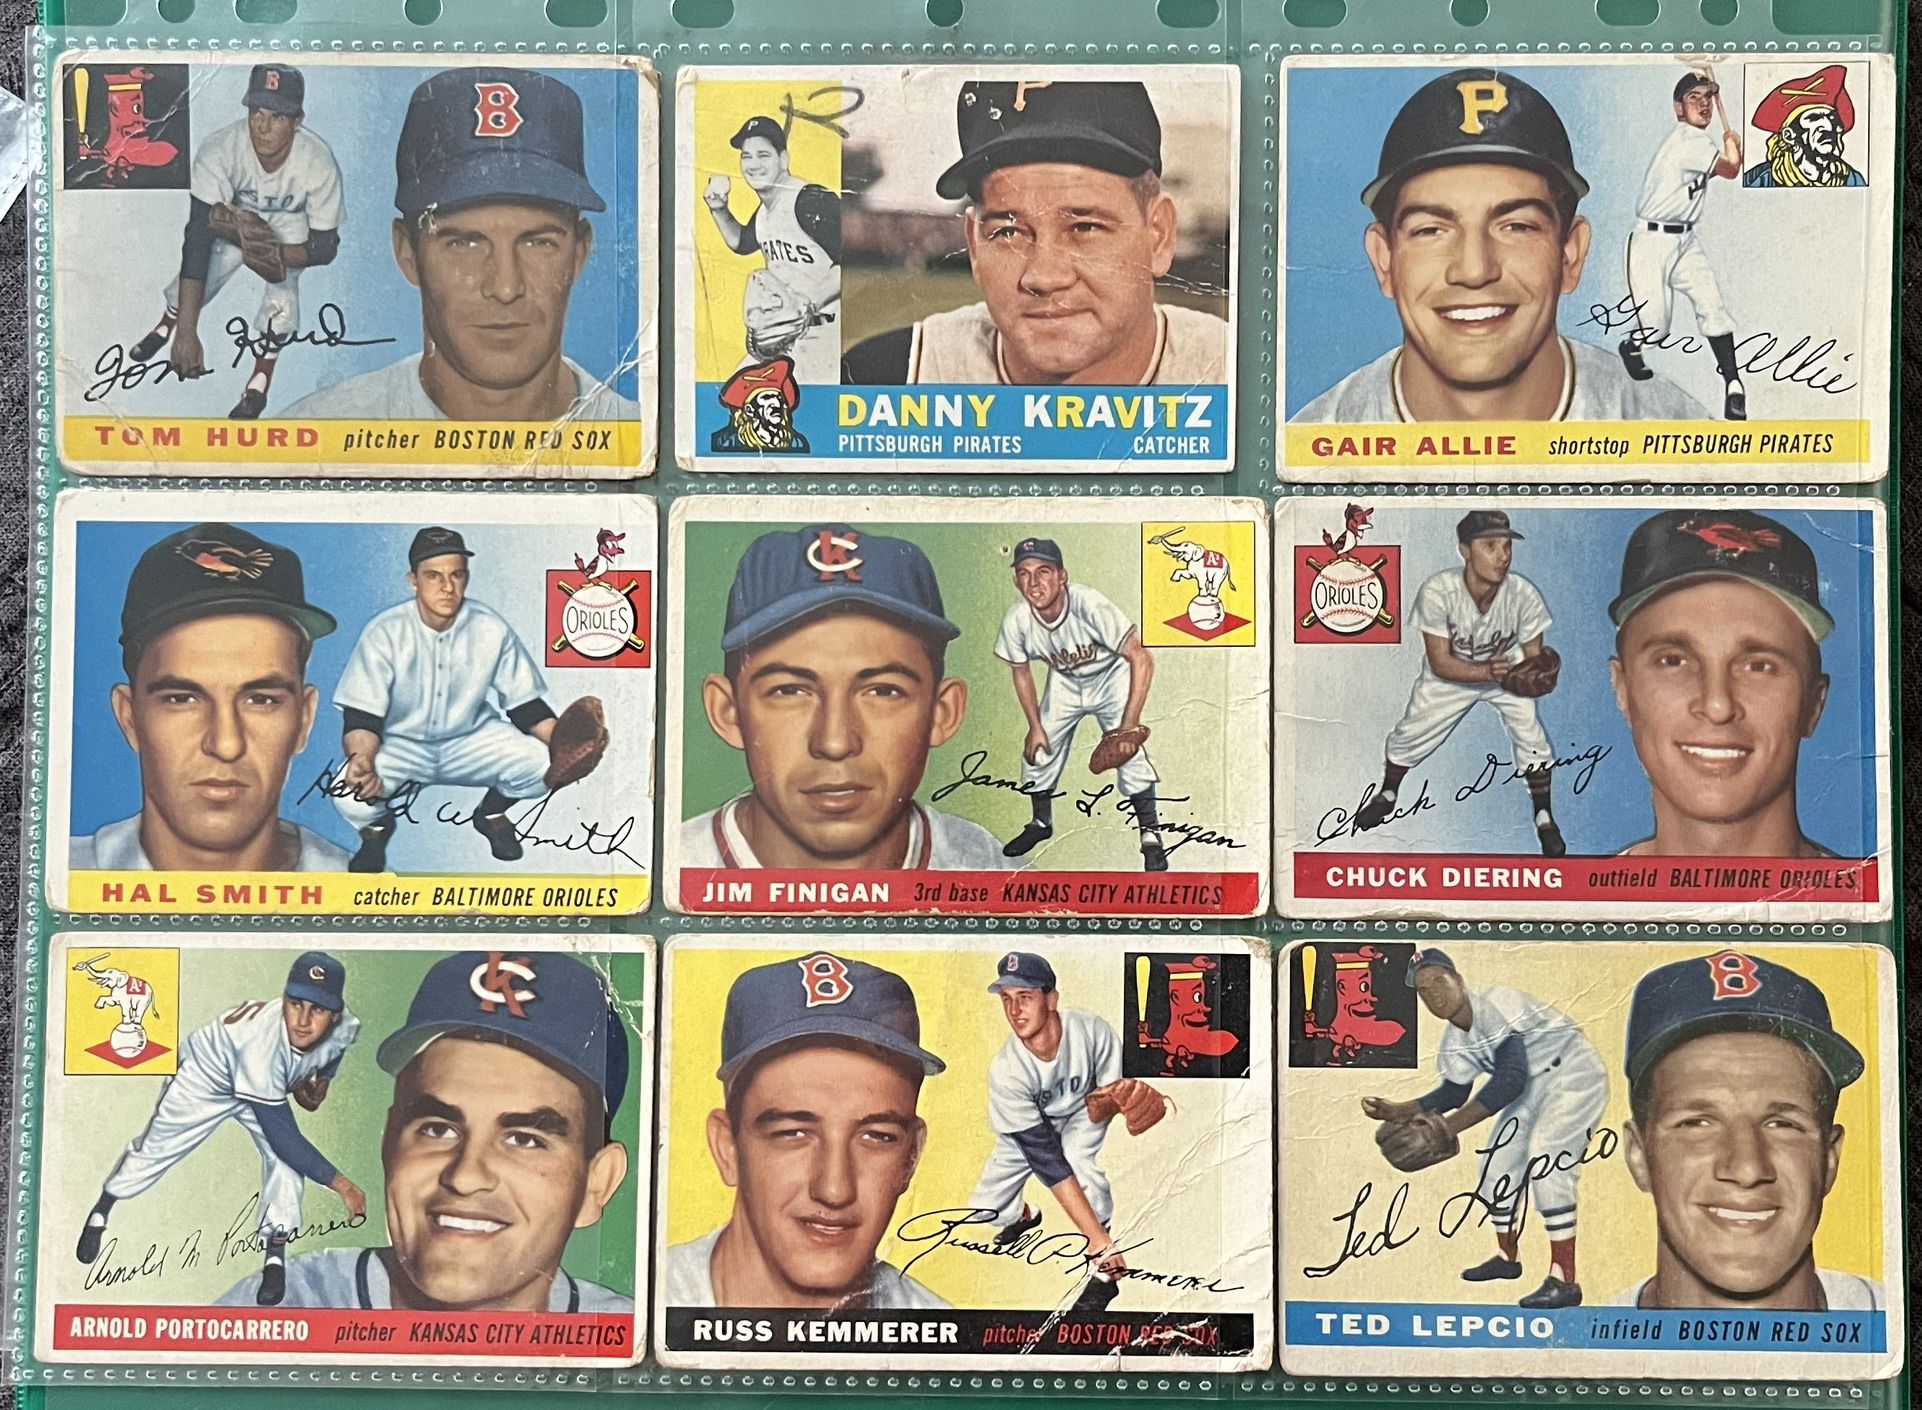 Old Vintage Baseball Cards Collection 